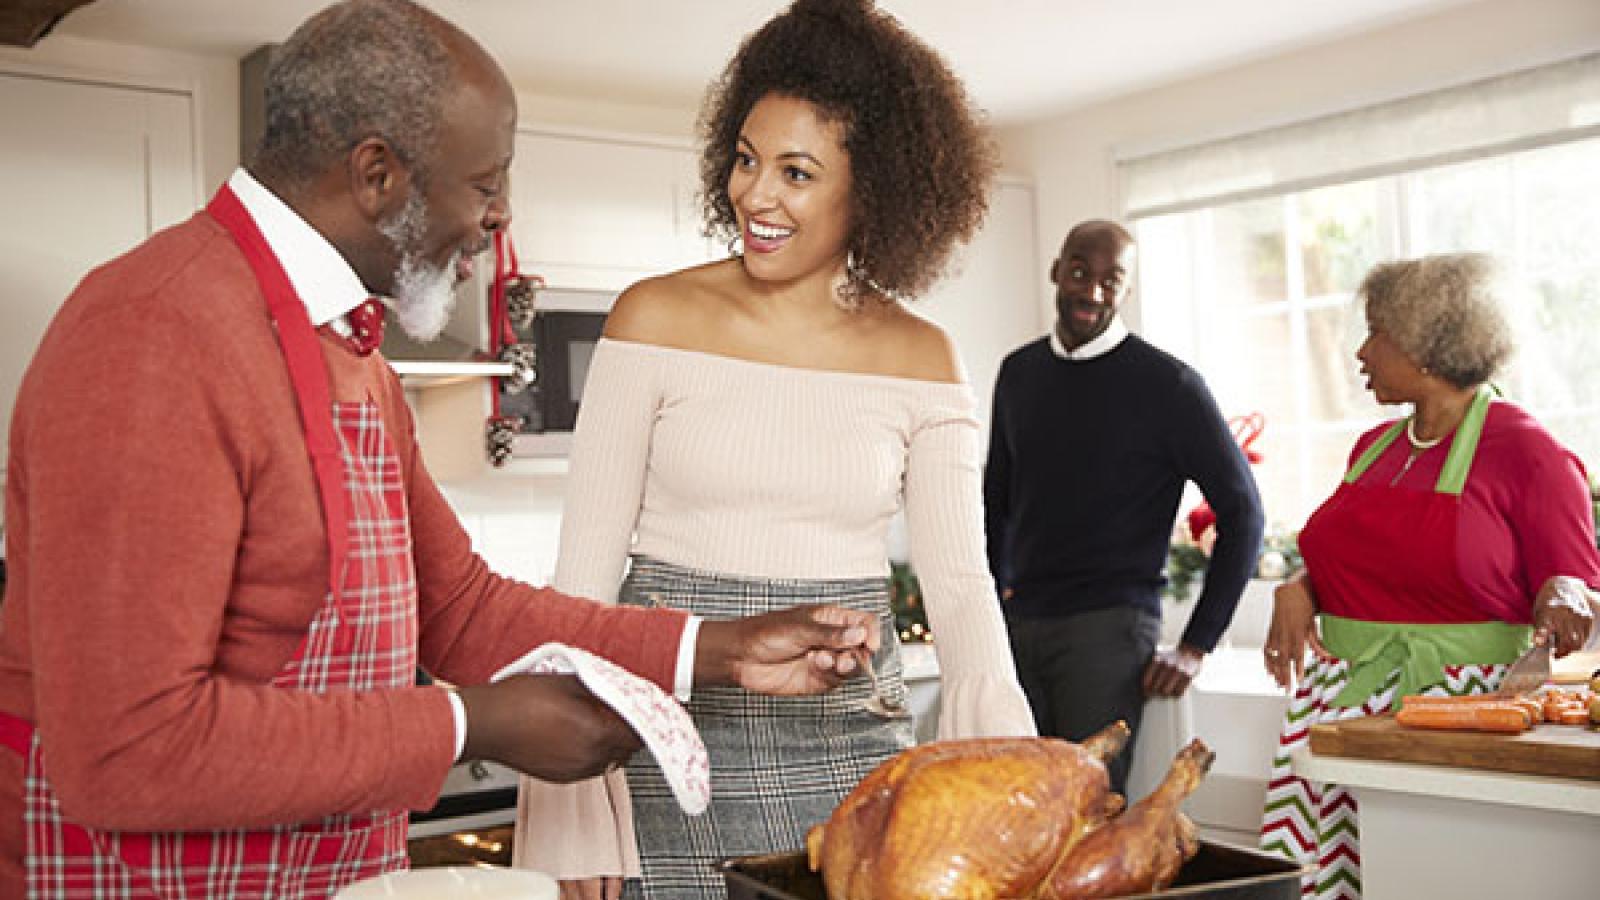 5 Healthy Holiday Cooking Substitutions